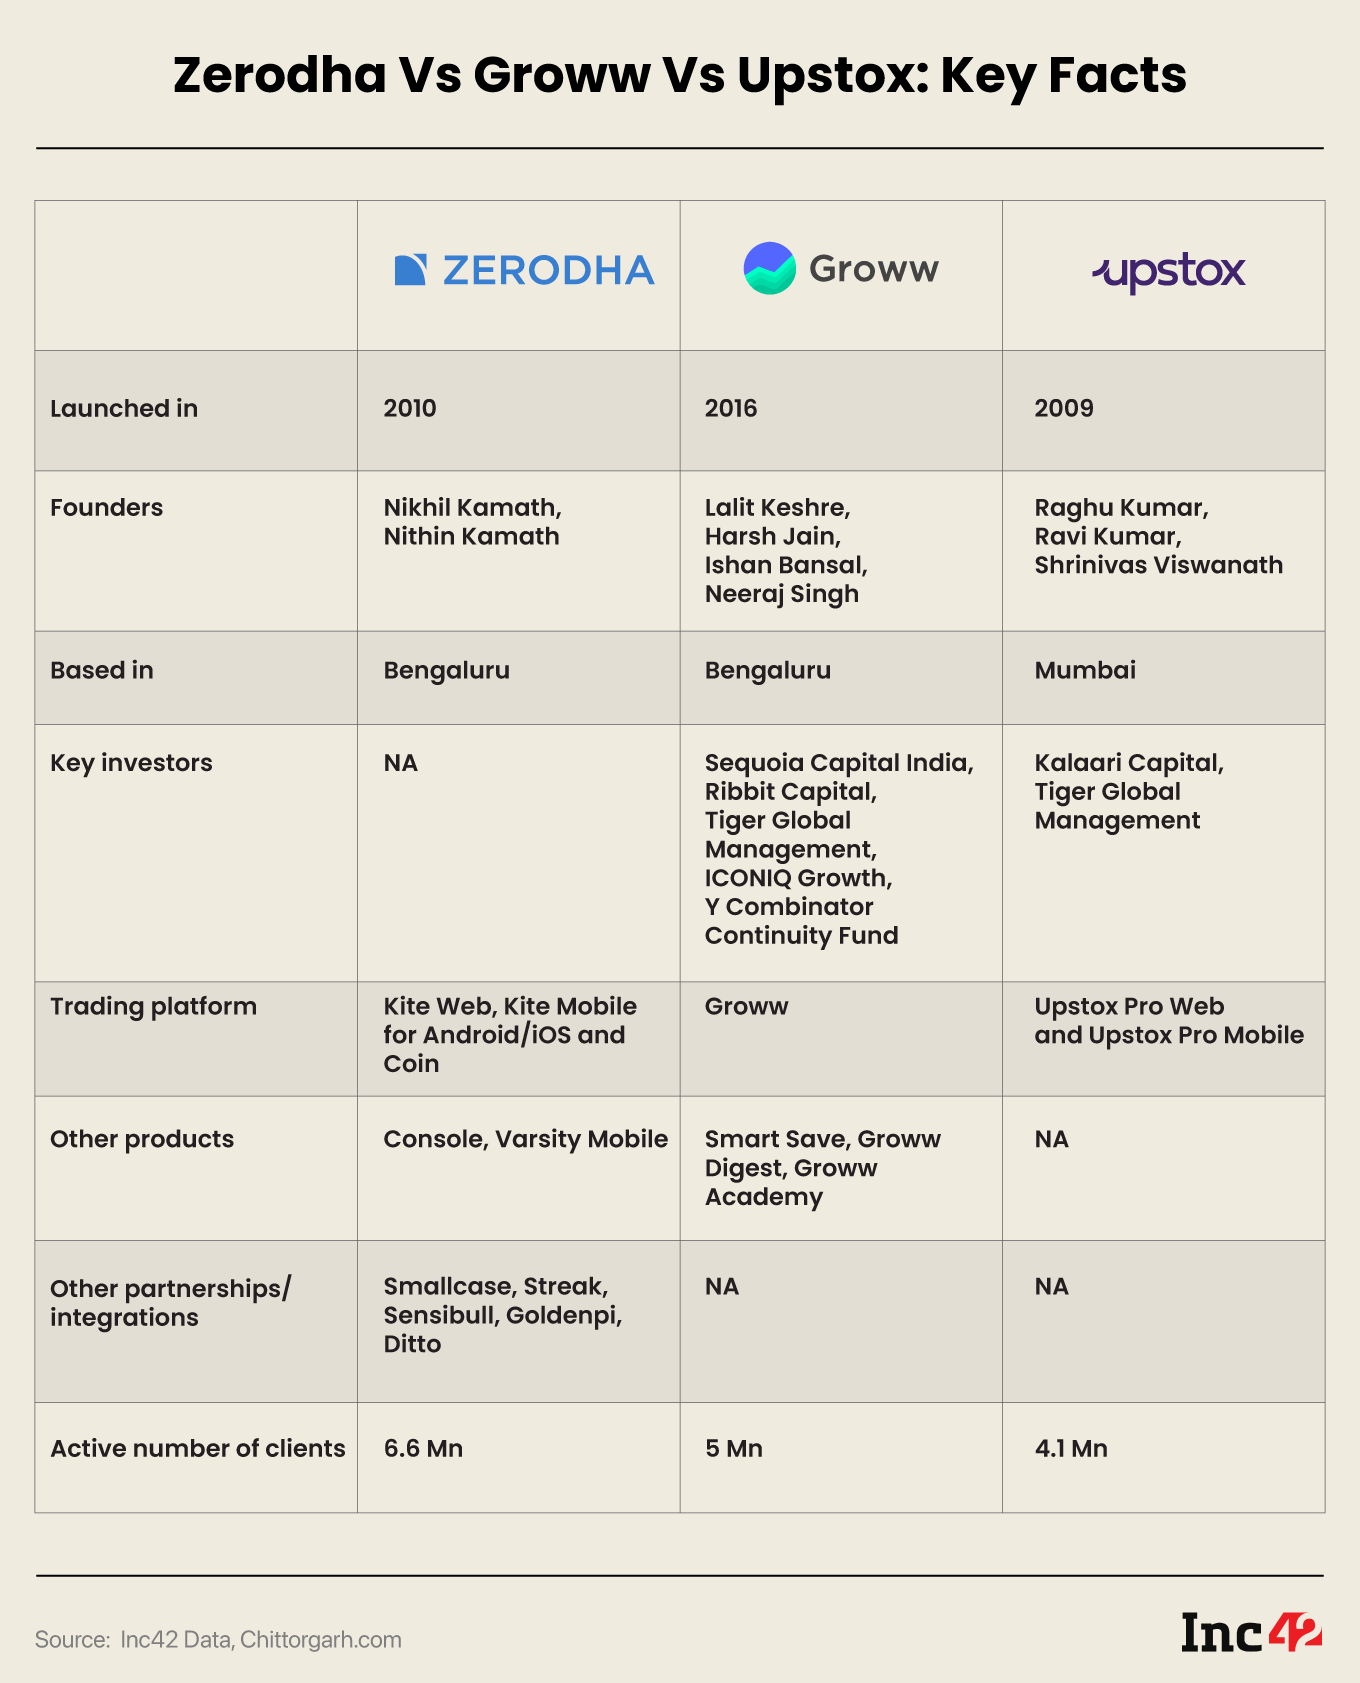 David Vs. Goliath: Is The 6-Year-Old Groww A Potential Threat To Market Leader Zerodha